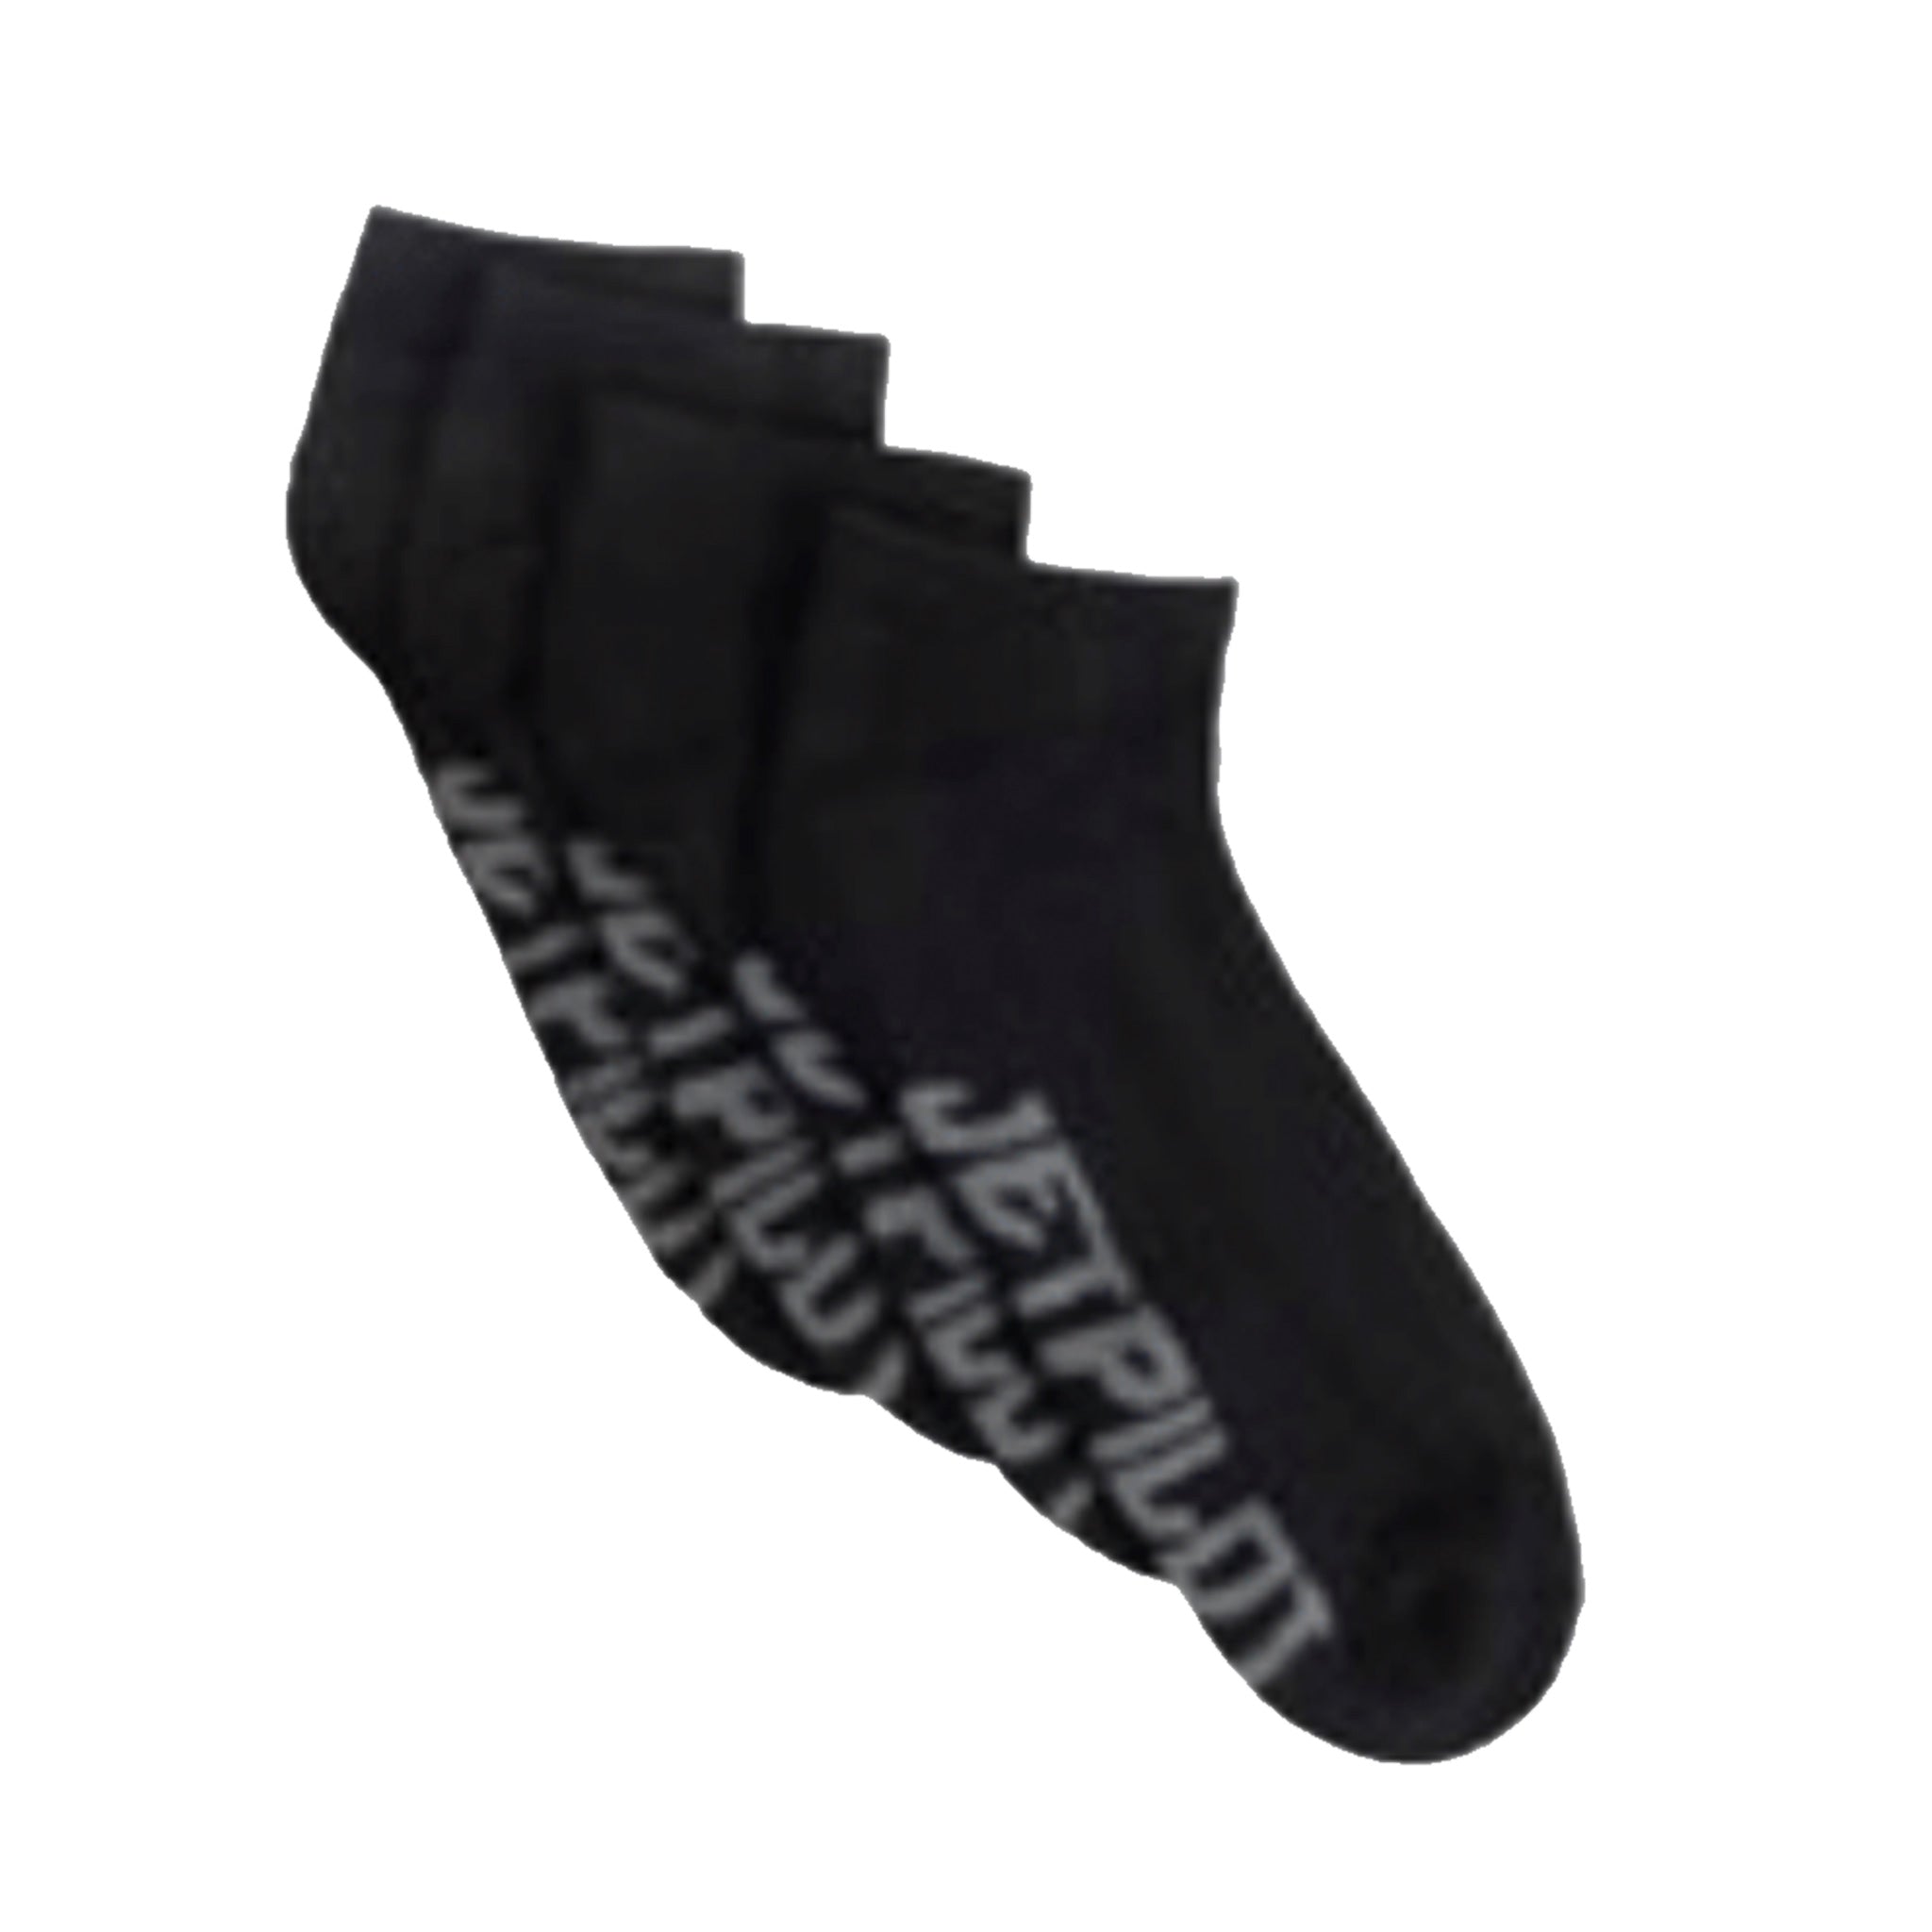 CORP ANKLE SOCK - BLACK